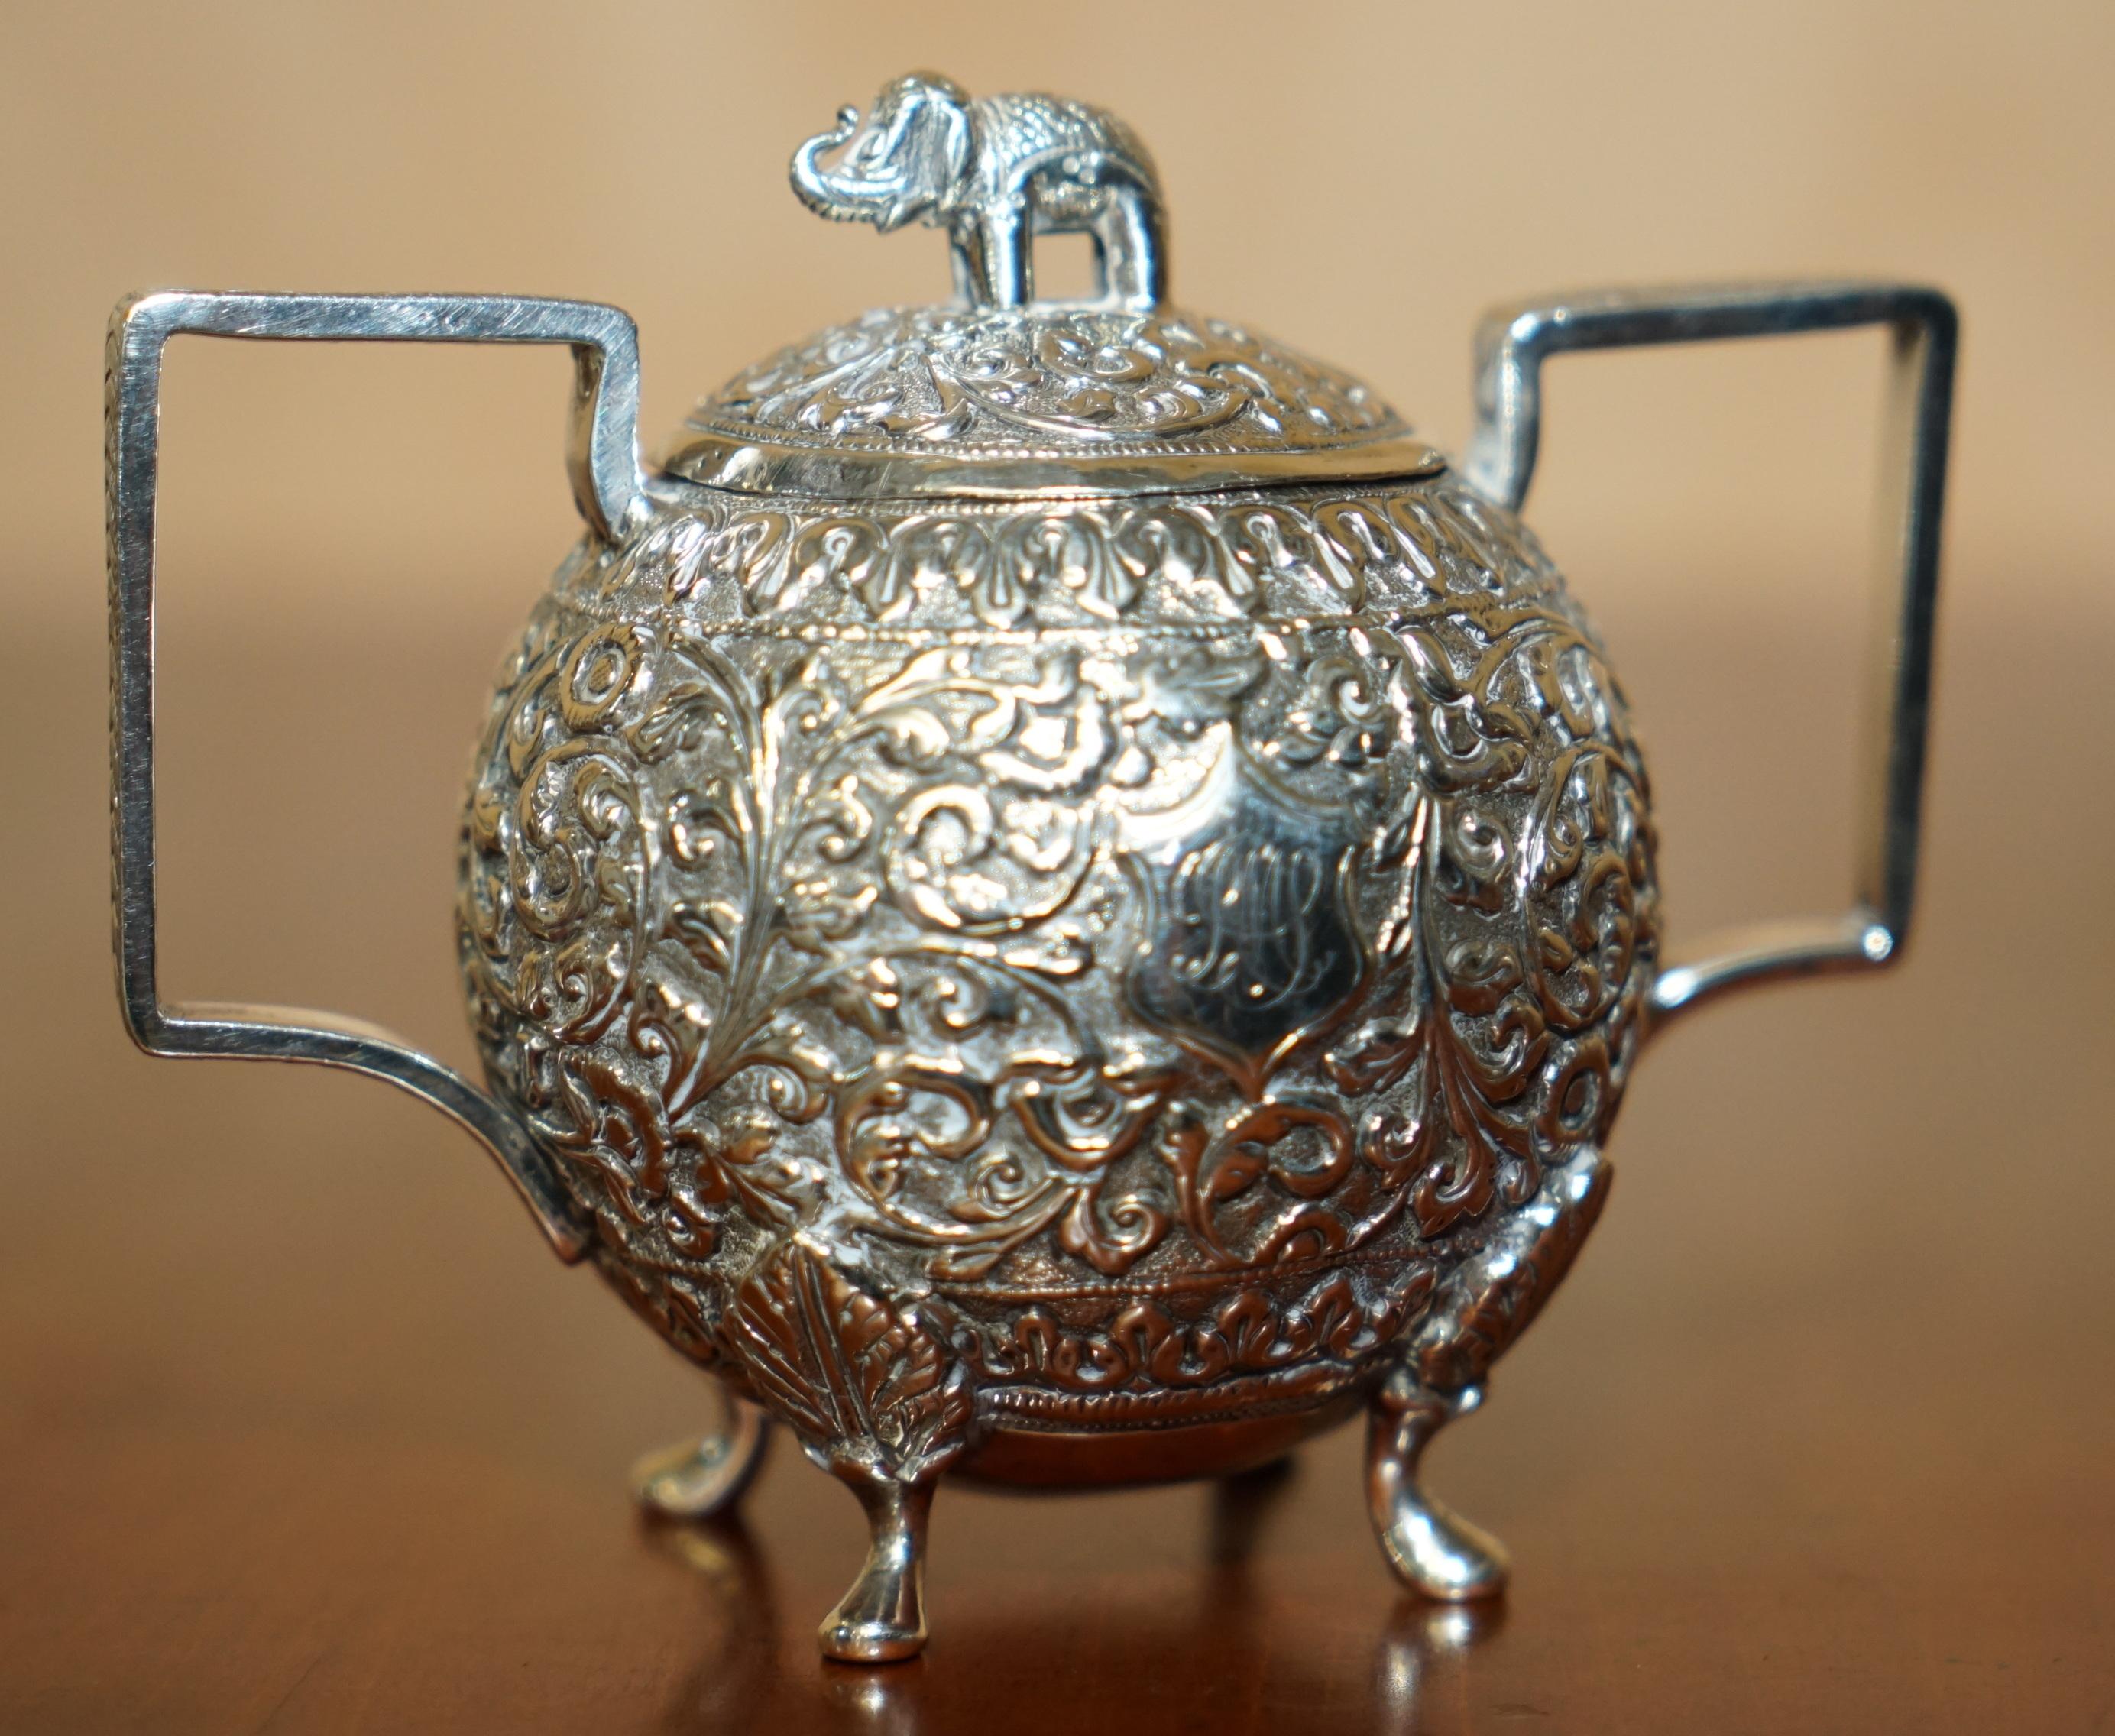 ANTIQUE INDIAN ELEPHANT COLONIAL SOLiD SILBER TEA SERVICE OOMERSI MAWJI & SONS im Angebot 5